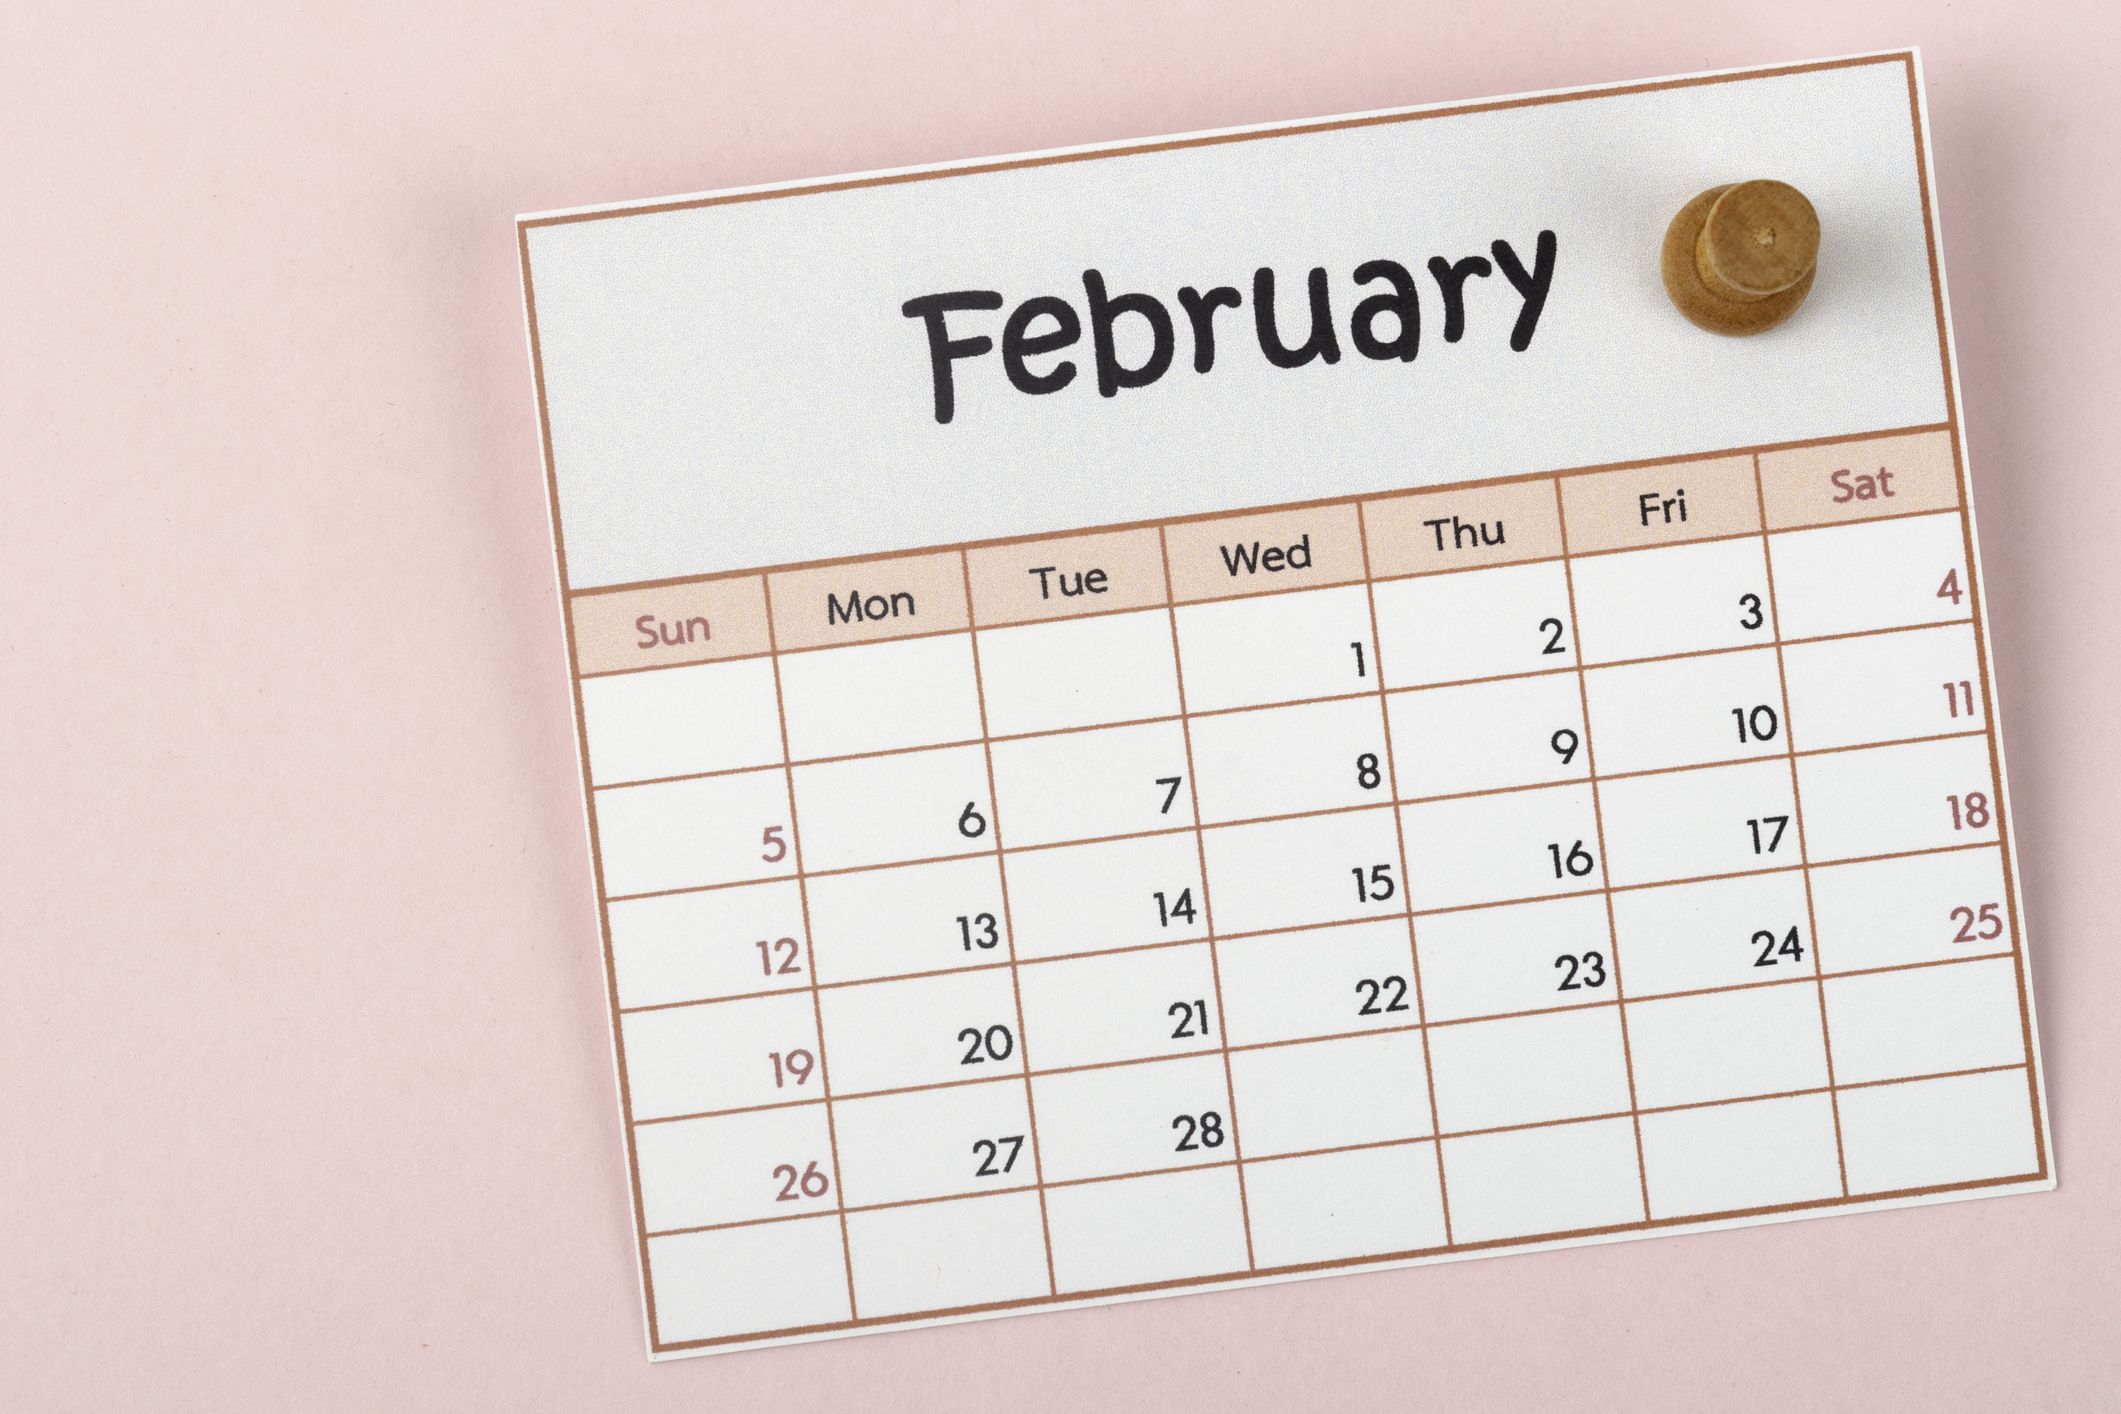 February 2023 Holidays, Observances and Special Dates